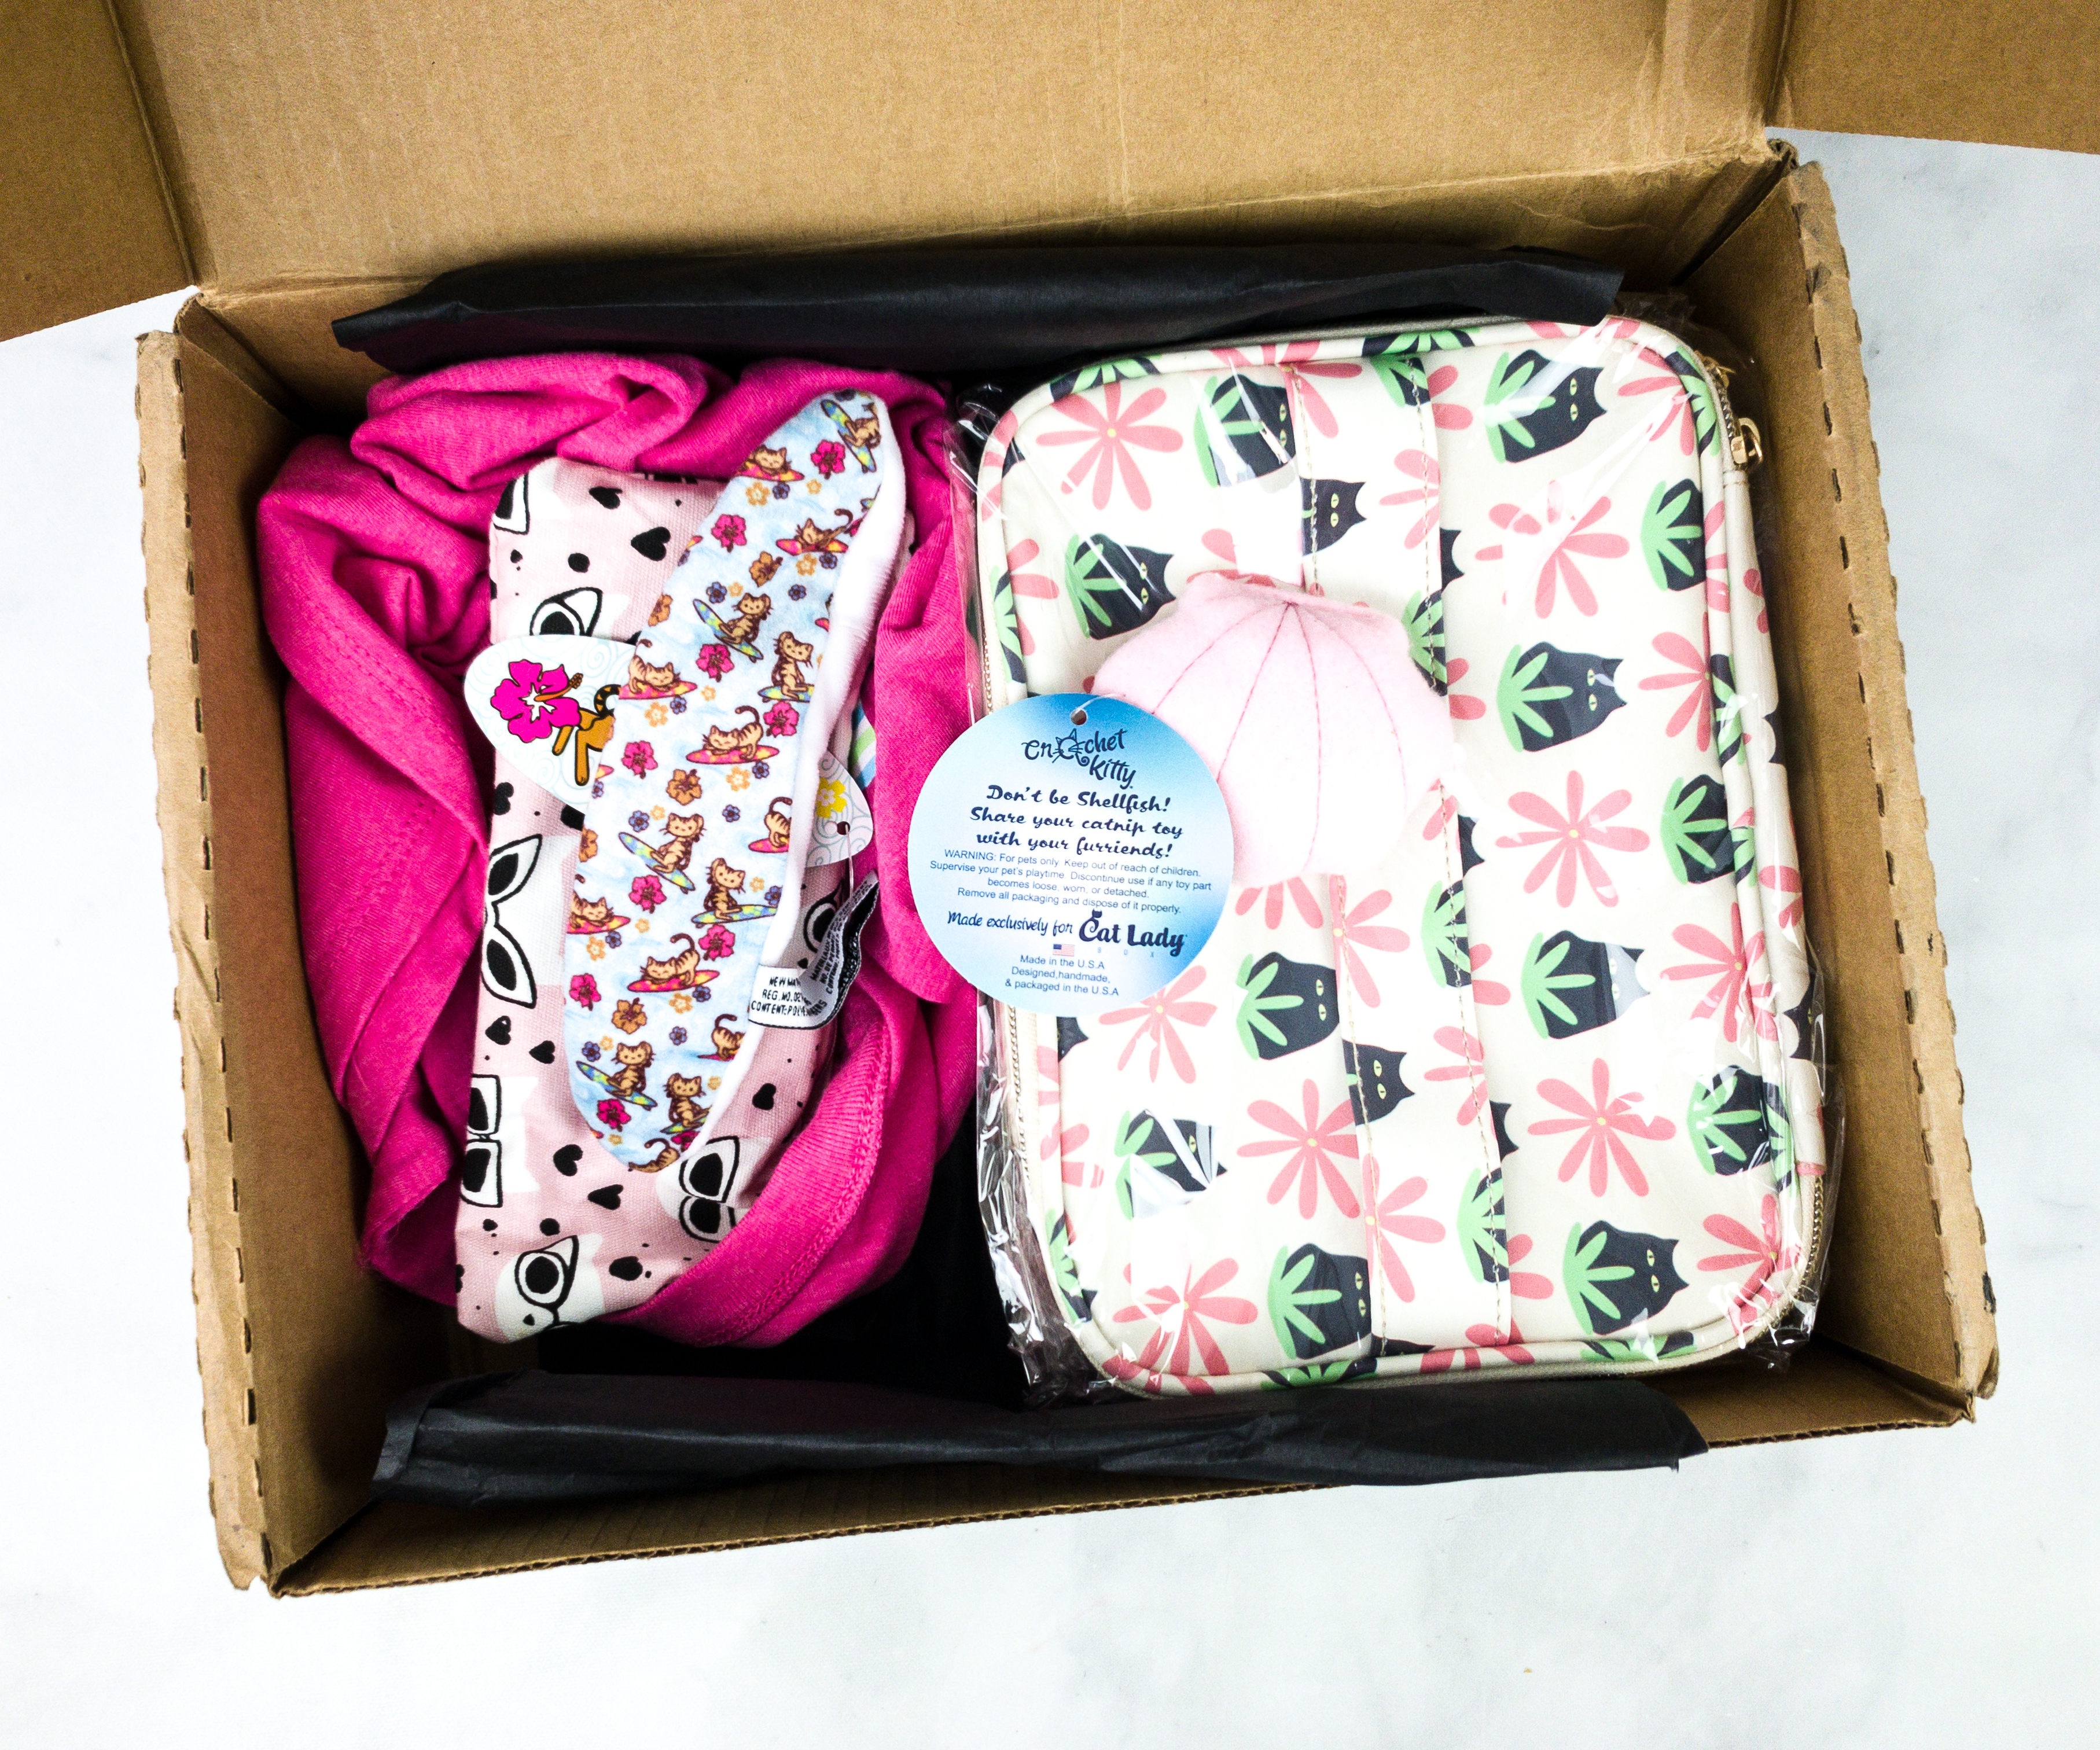 Cat Lady Box July 2020 Subscription Box Review PURR PARADISE hello